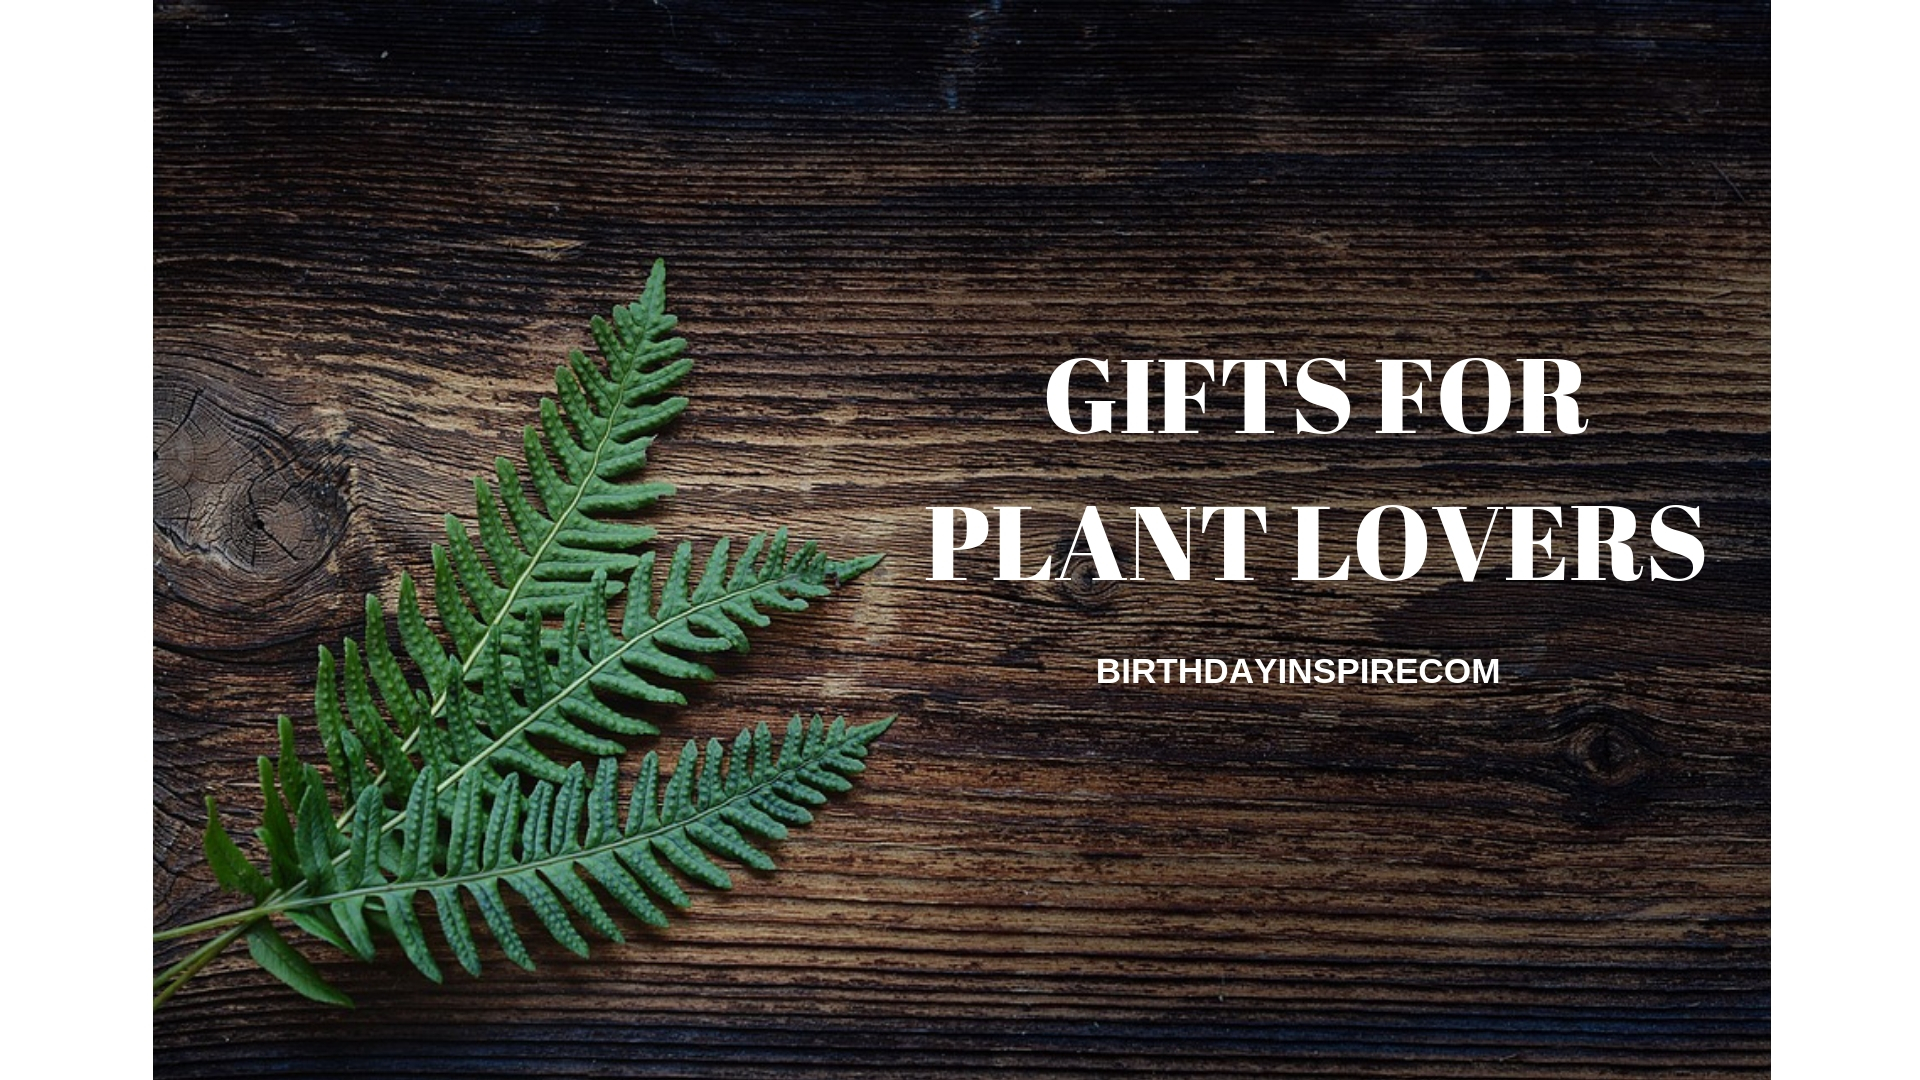 GIFTS FOR PLANT LOVERS